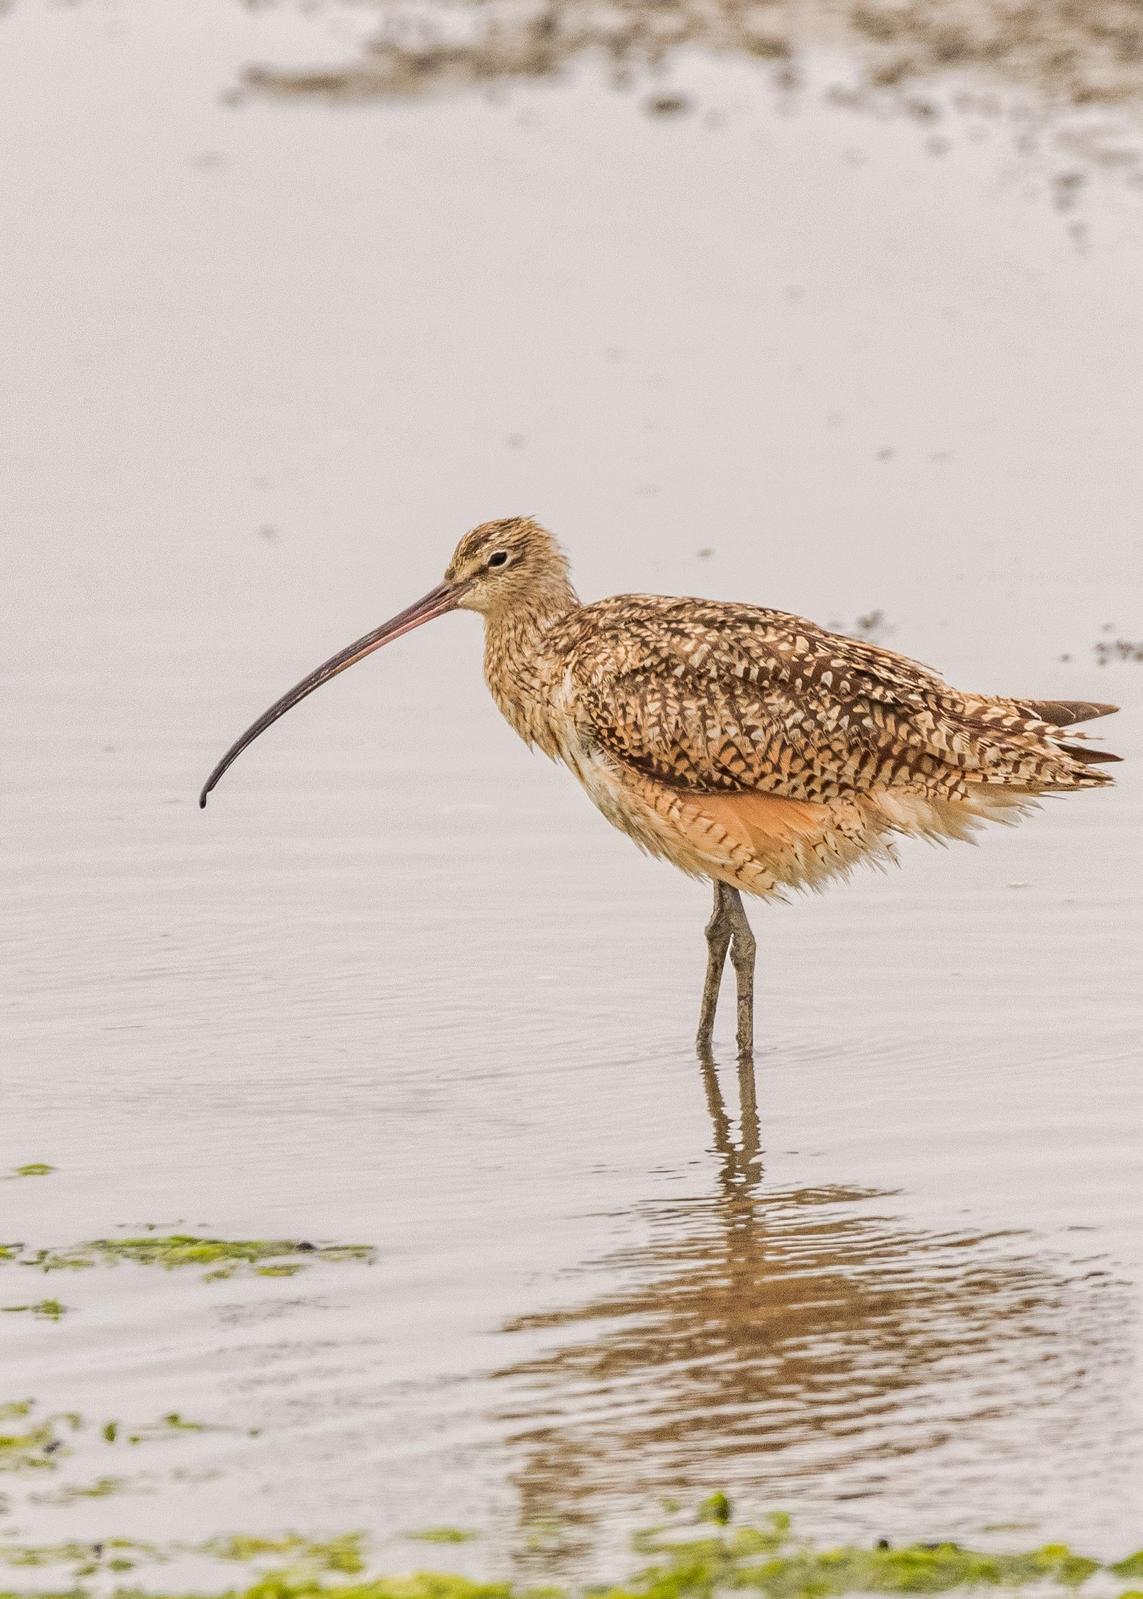 Long-billed Curlew Photo by Keshava Mysore